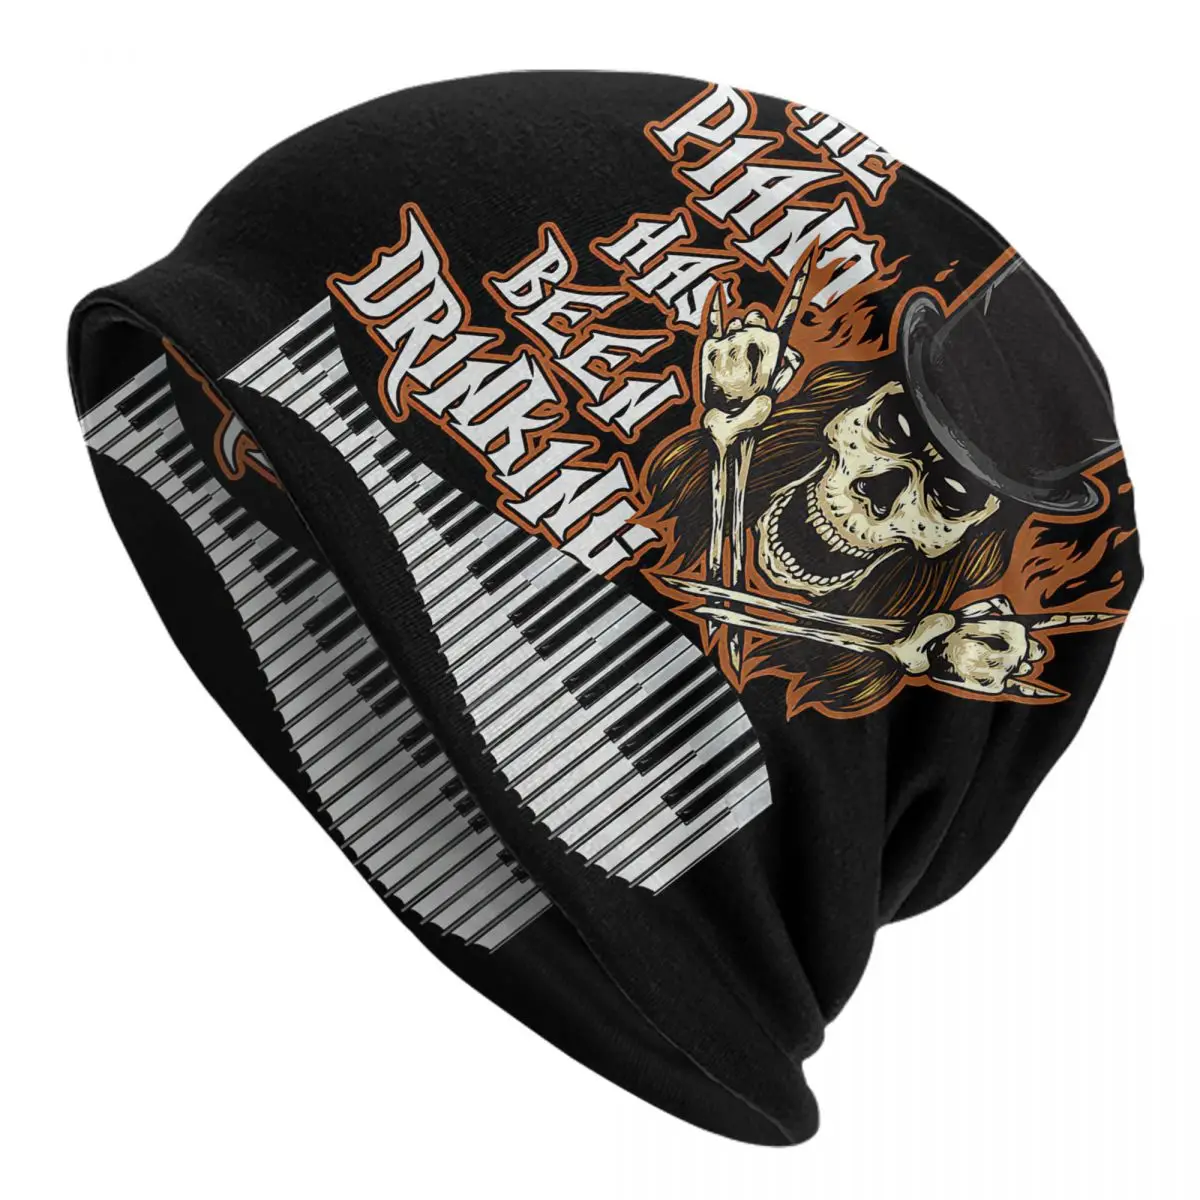 Piano Player Skull Skeleton Grand Piano Pianist Gift Adult Men's Women's Knit Hat Keep warm winter Funny knitted hat